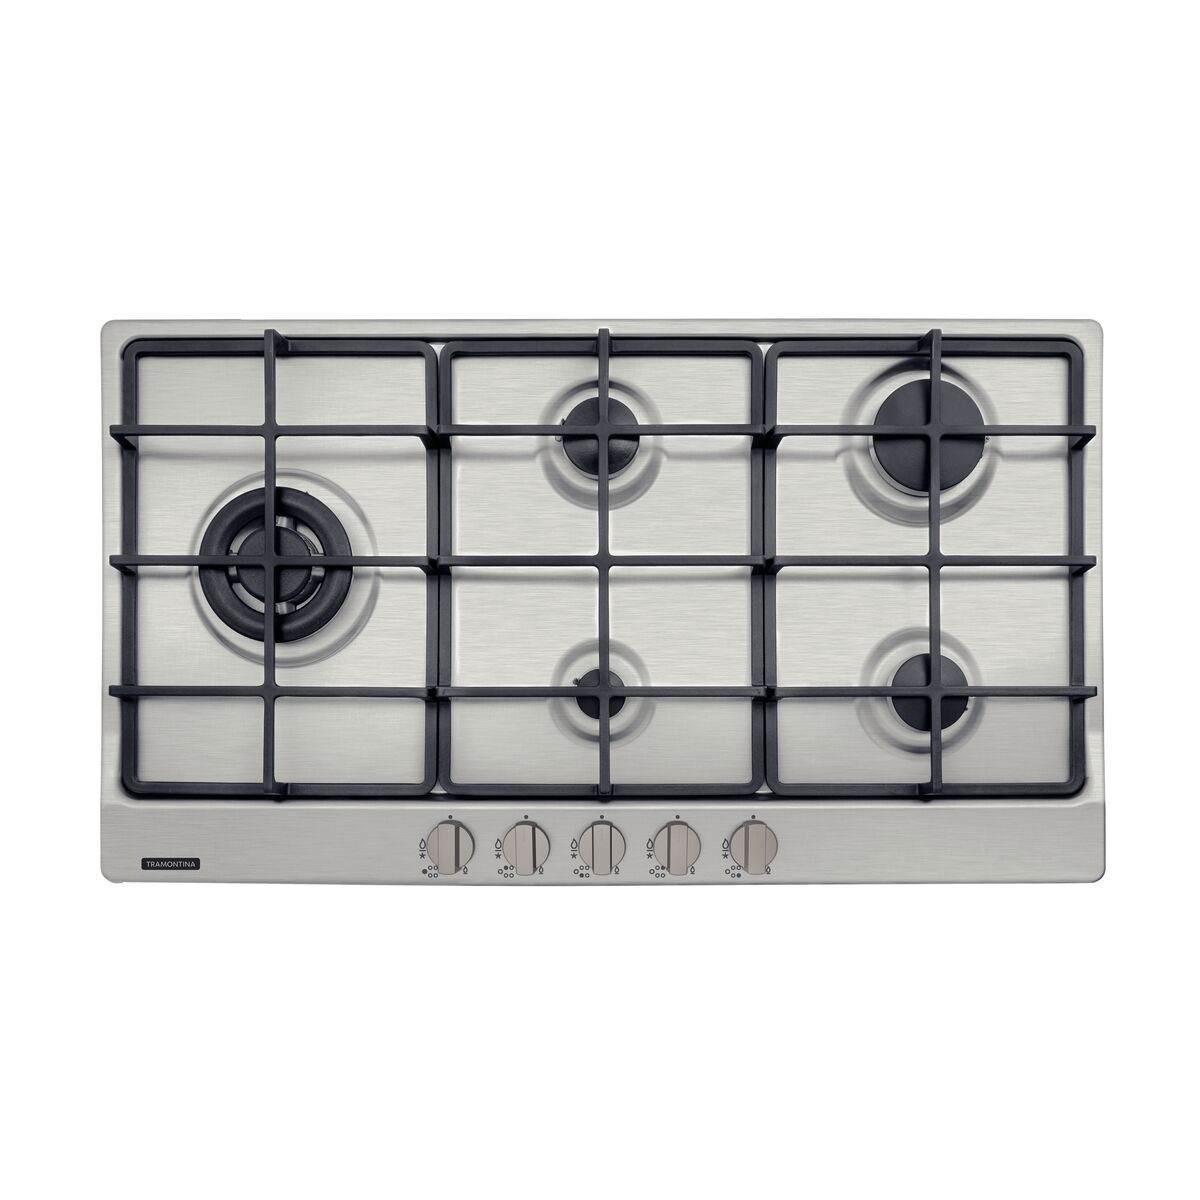 Tramontina stainless steel gas cooktop with 5 burners and cast iron trivets